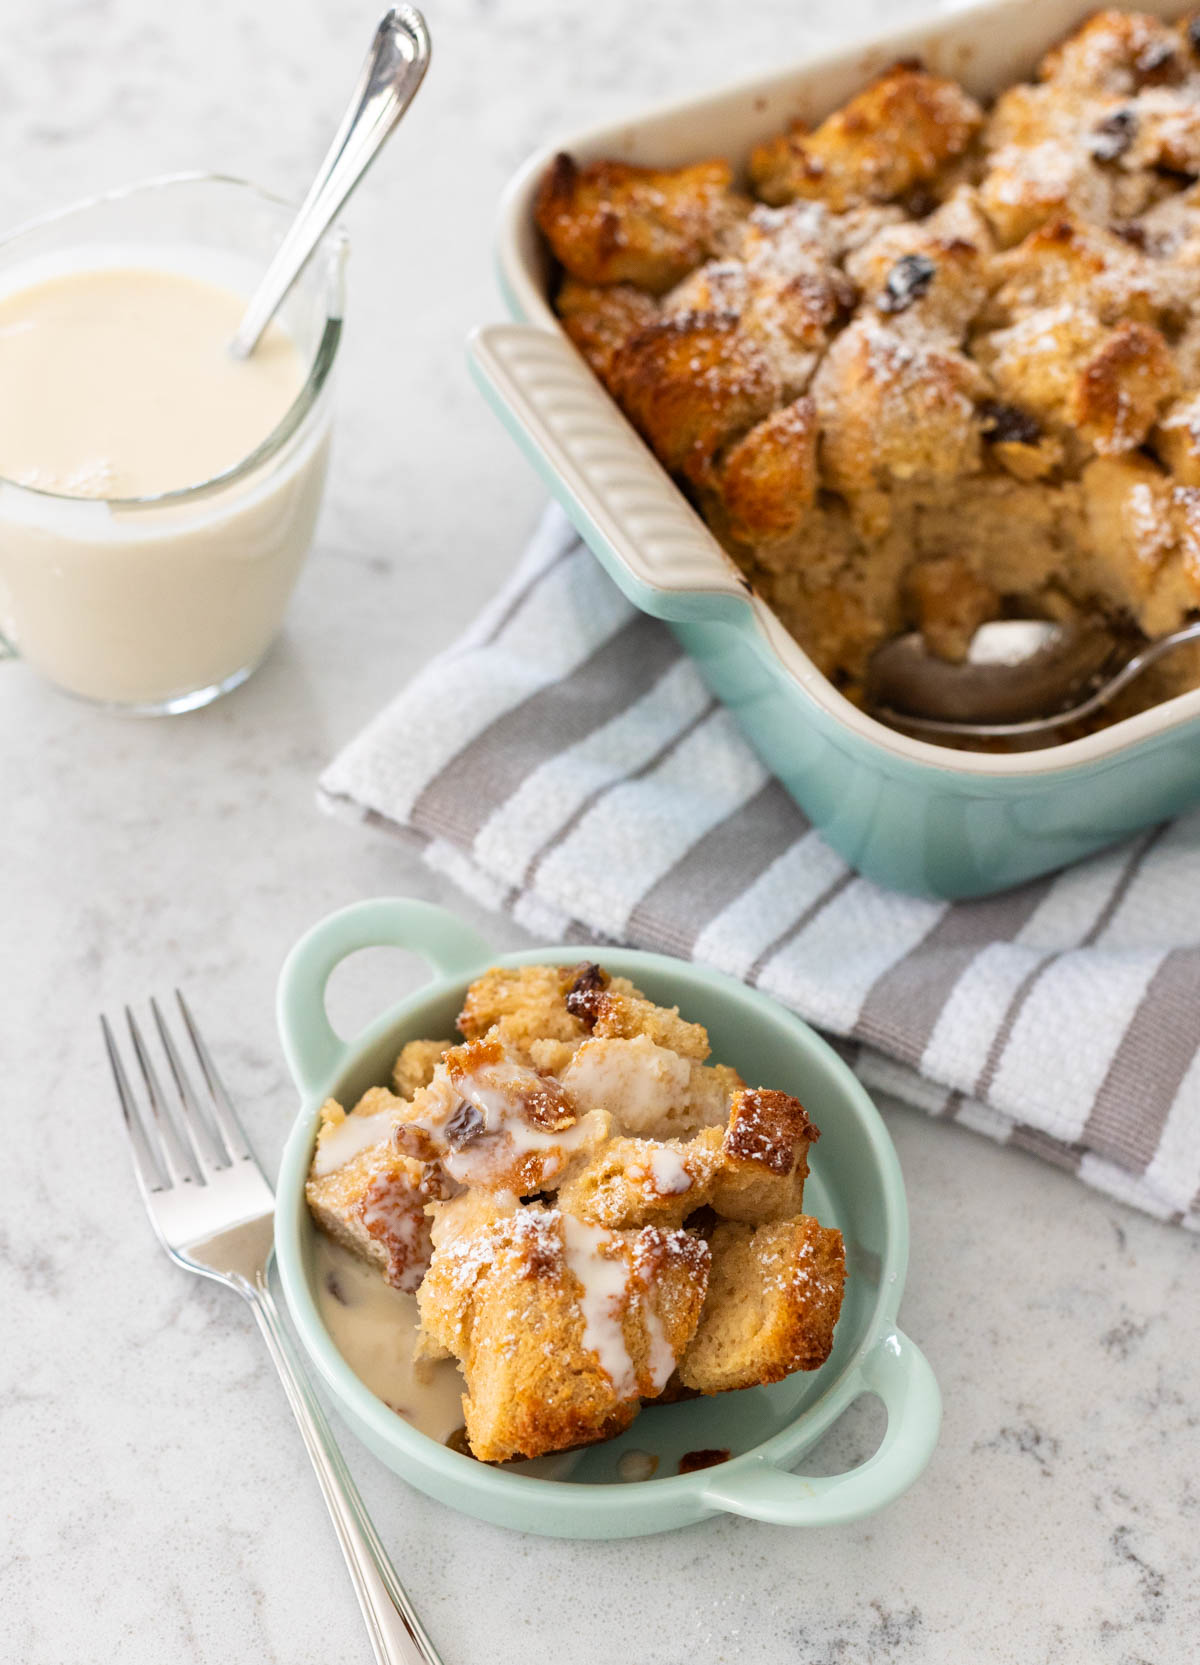 The bread pudding has been scooped into a small serving dish. A pitcher of bourbon sauce sits next to it and a little has been drizzled over the dessert.